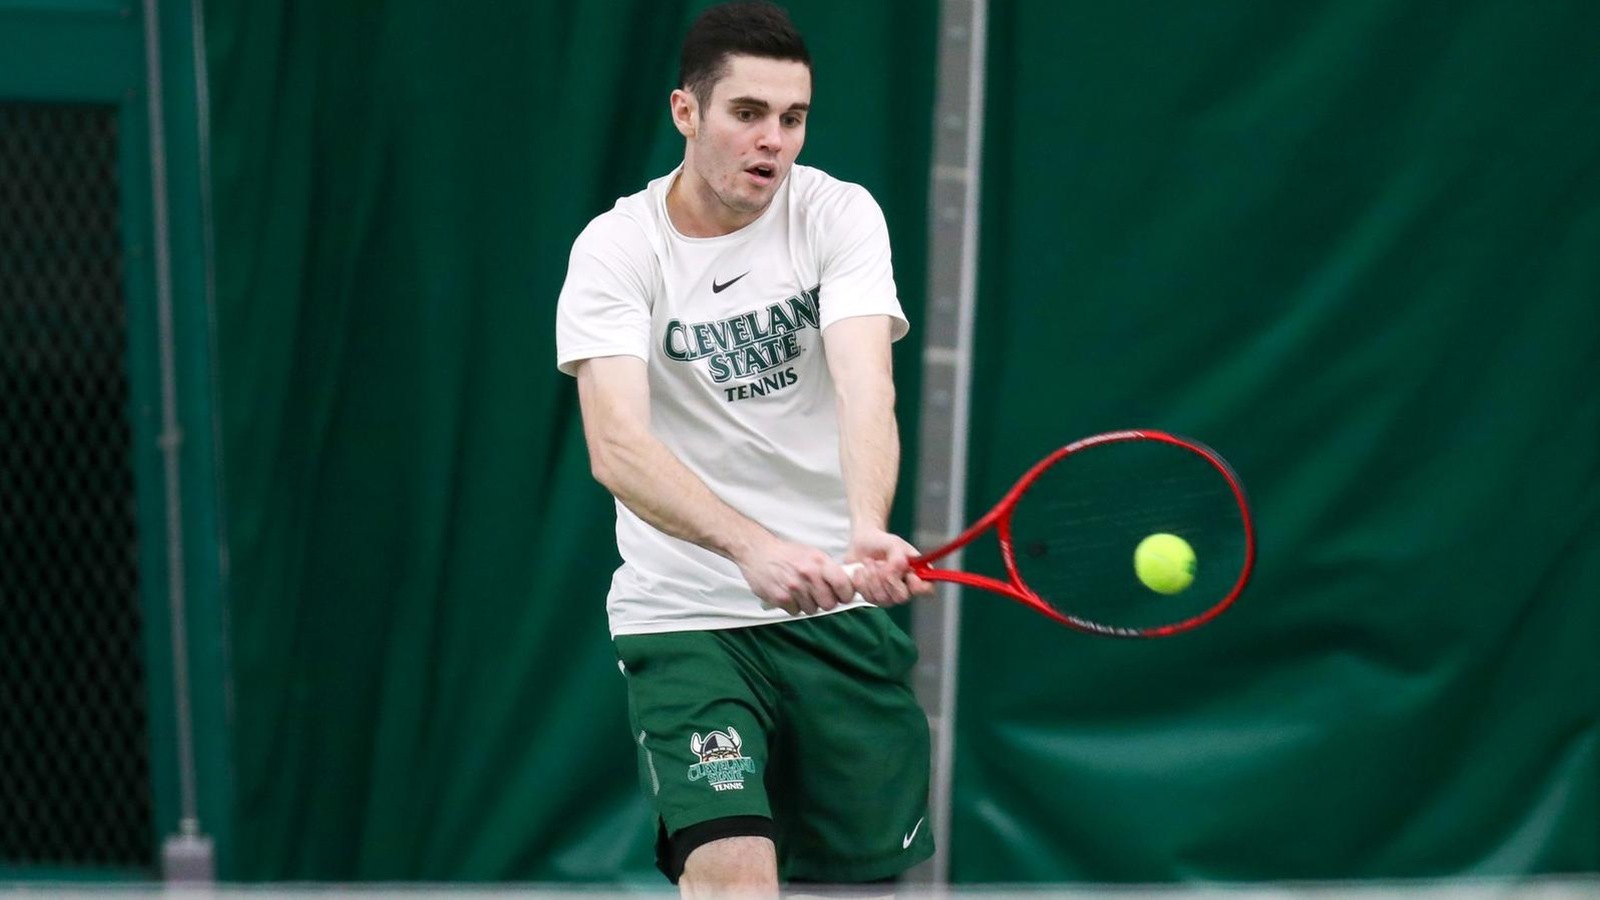 Phillips Moves Onto CSU Singles Wins List As Vikings Pick Up 5-2 Victory Over Xavier